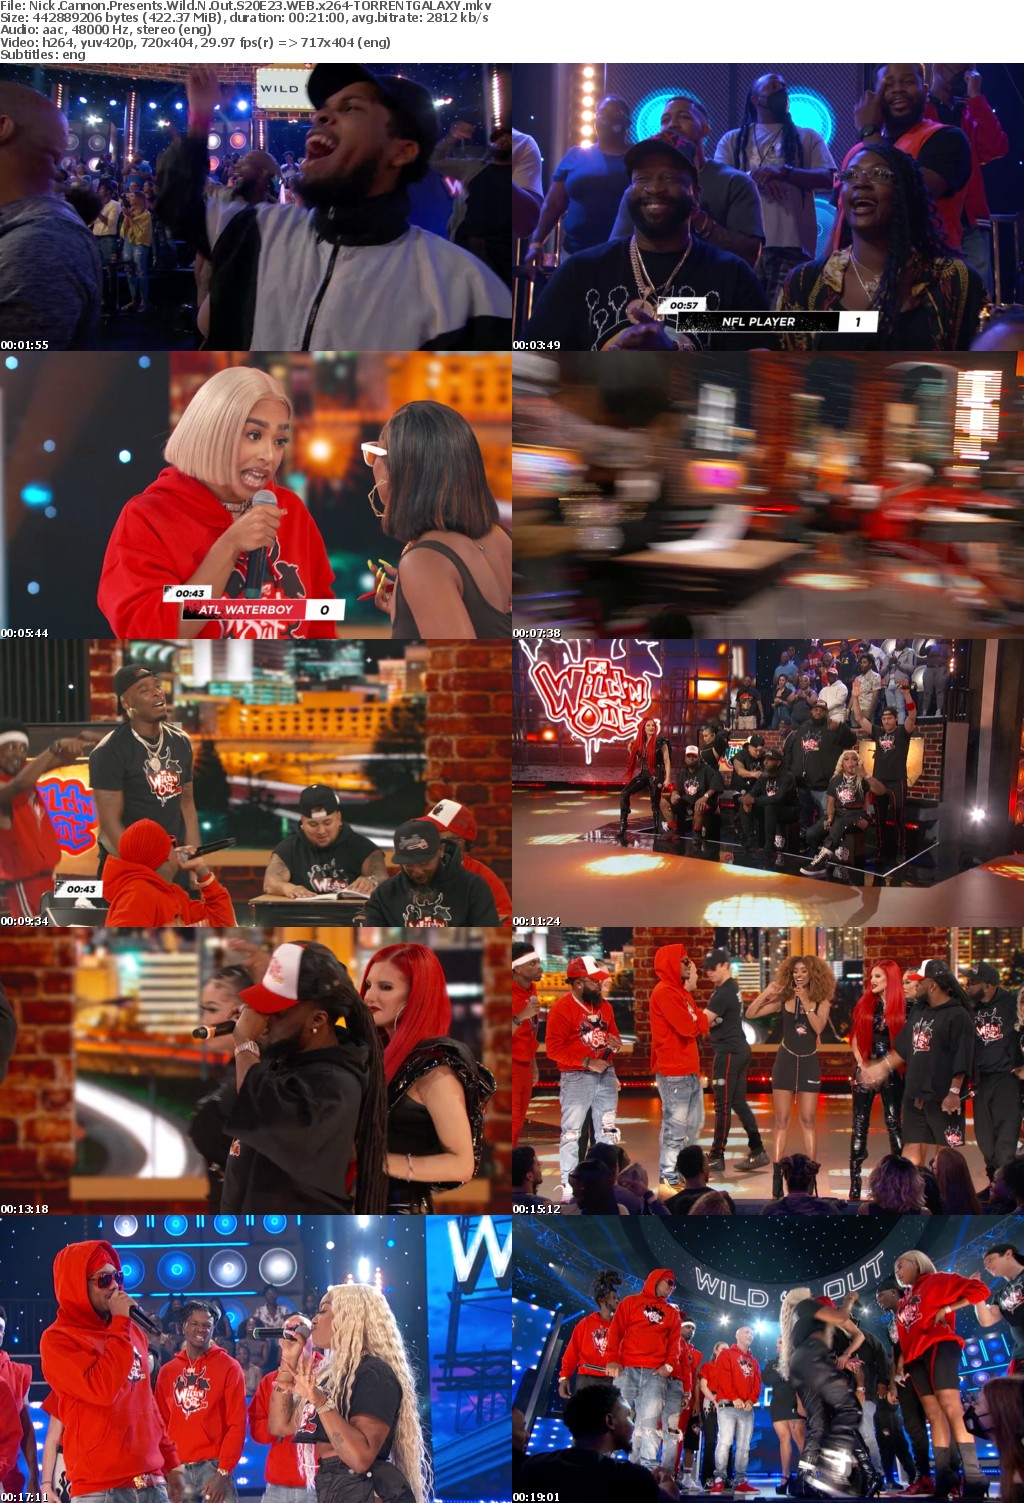 Nick Cannon Presents Wild N Out S20E23 WEB x264-GALAXY